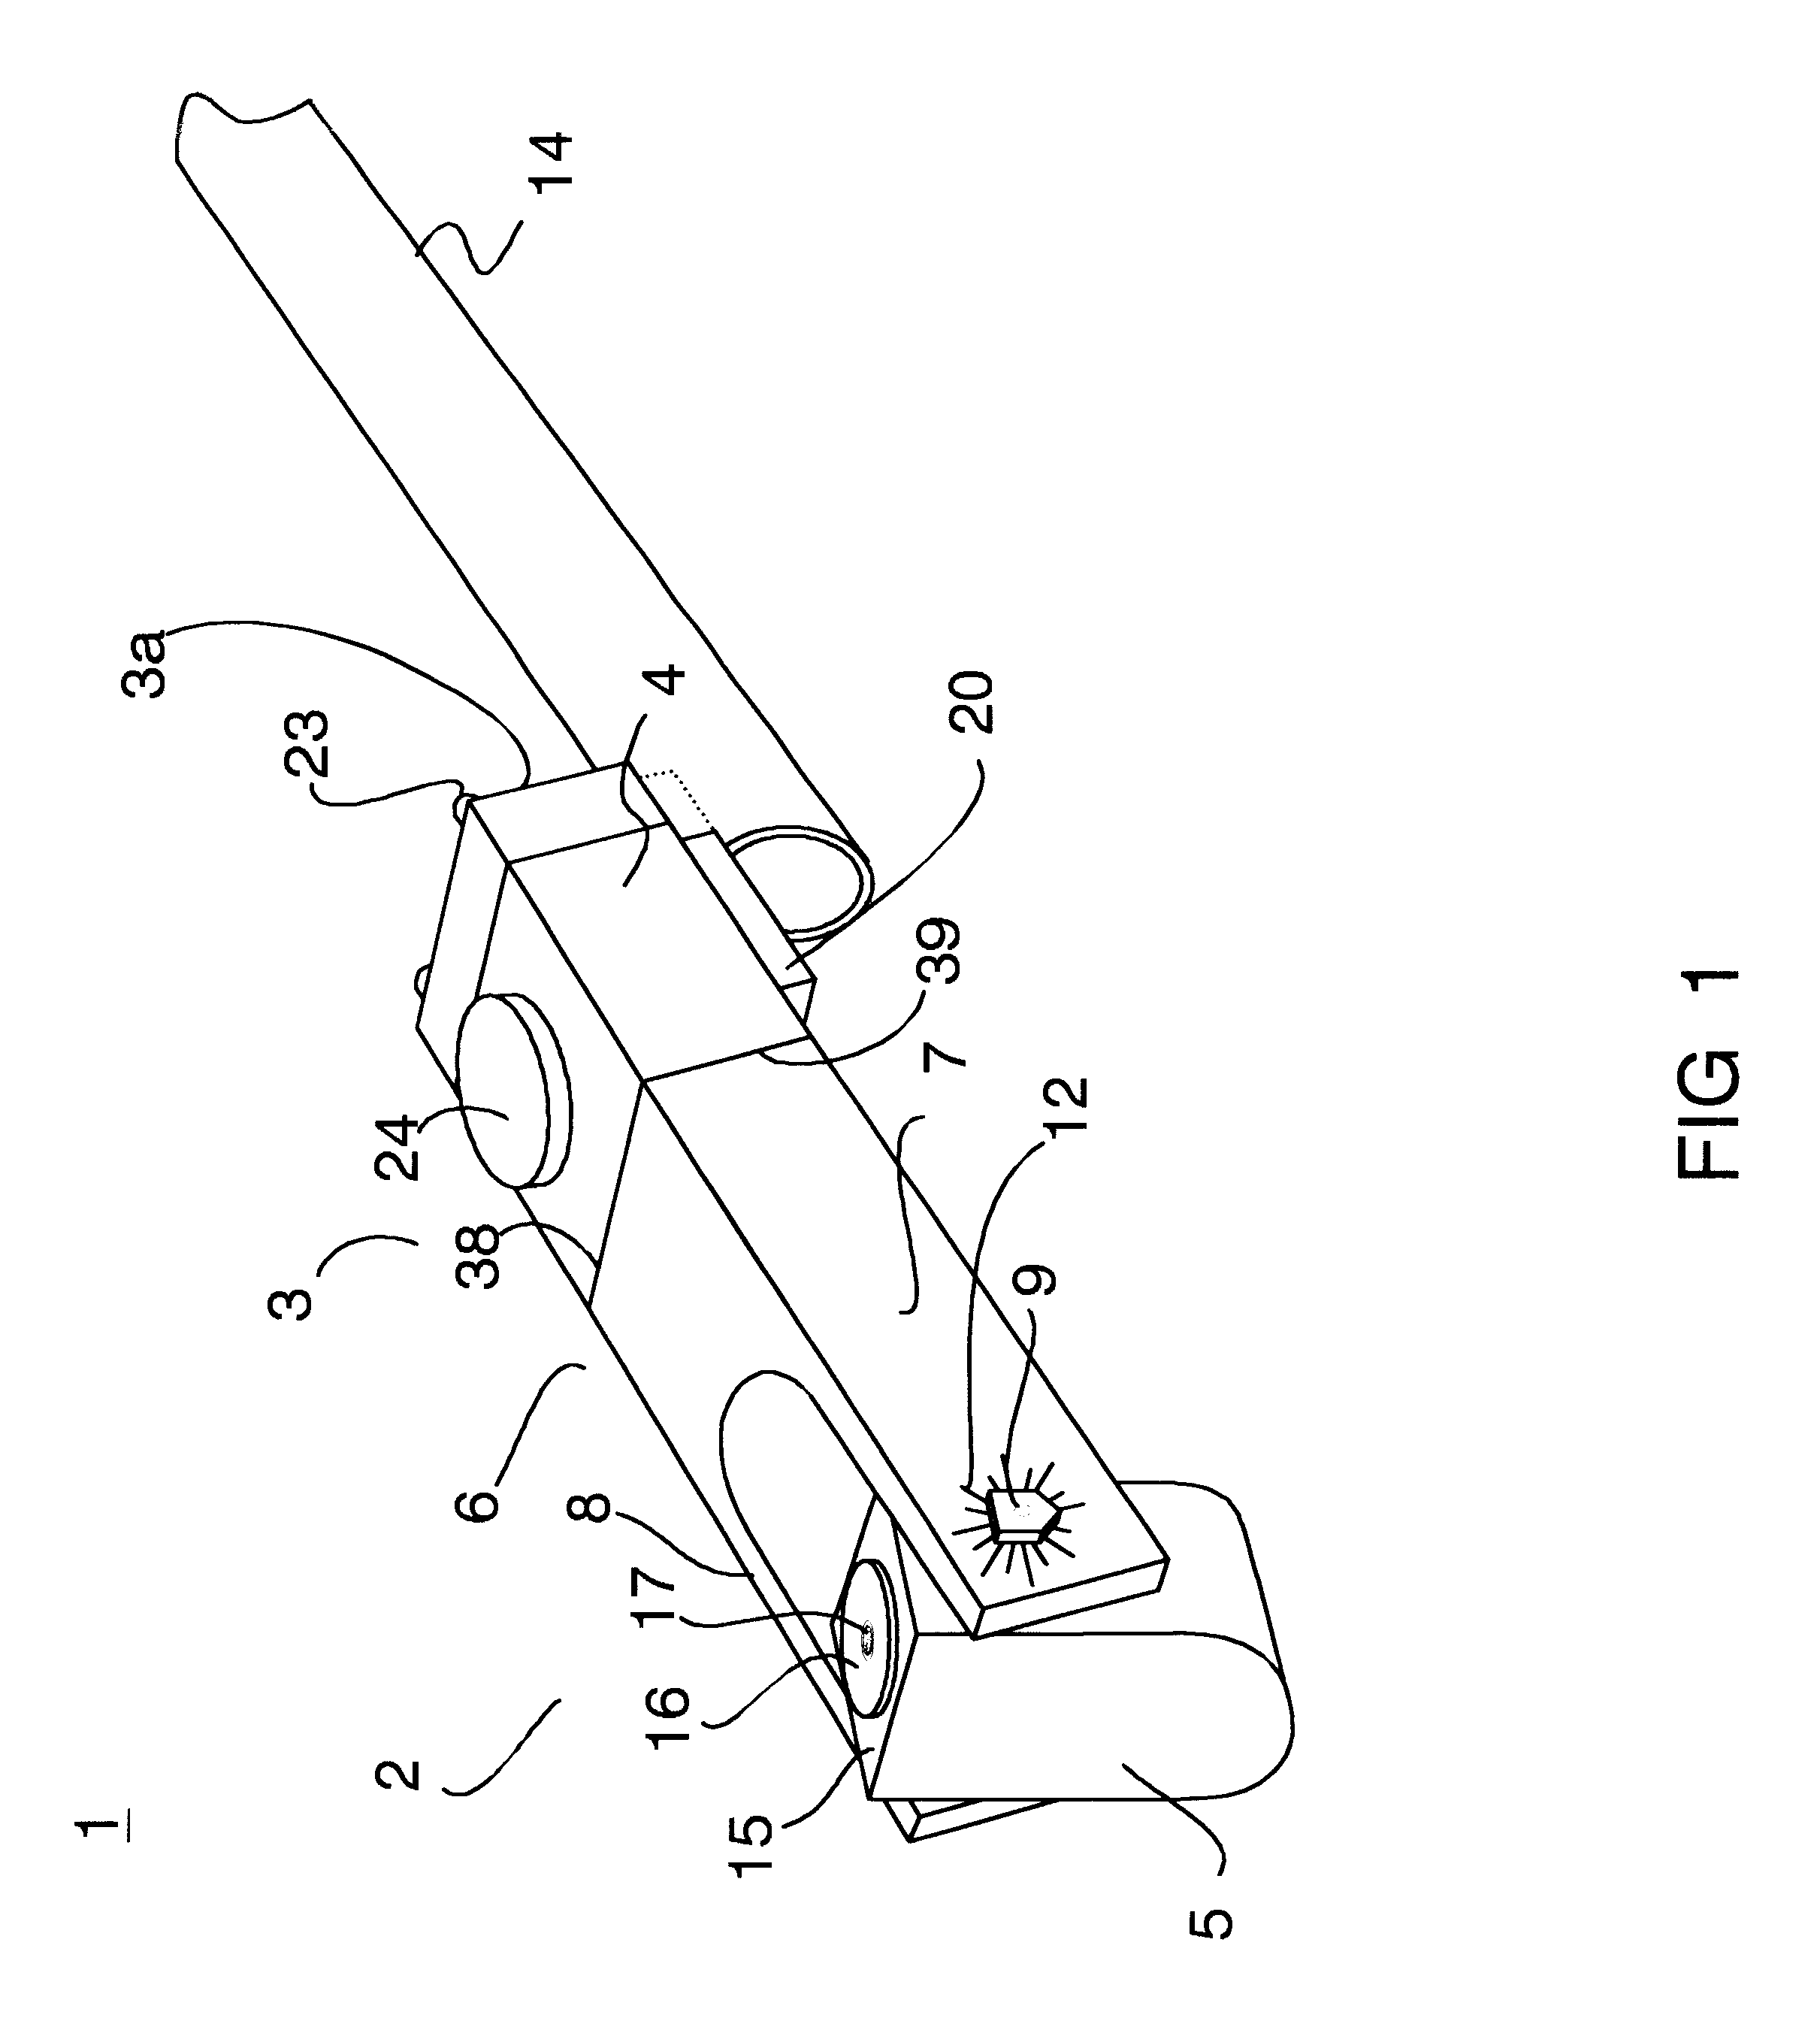 Pipe-bending alignment device